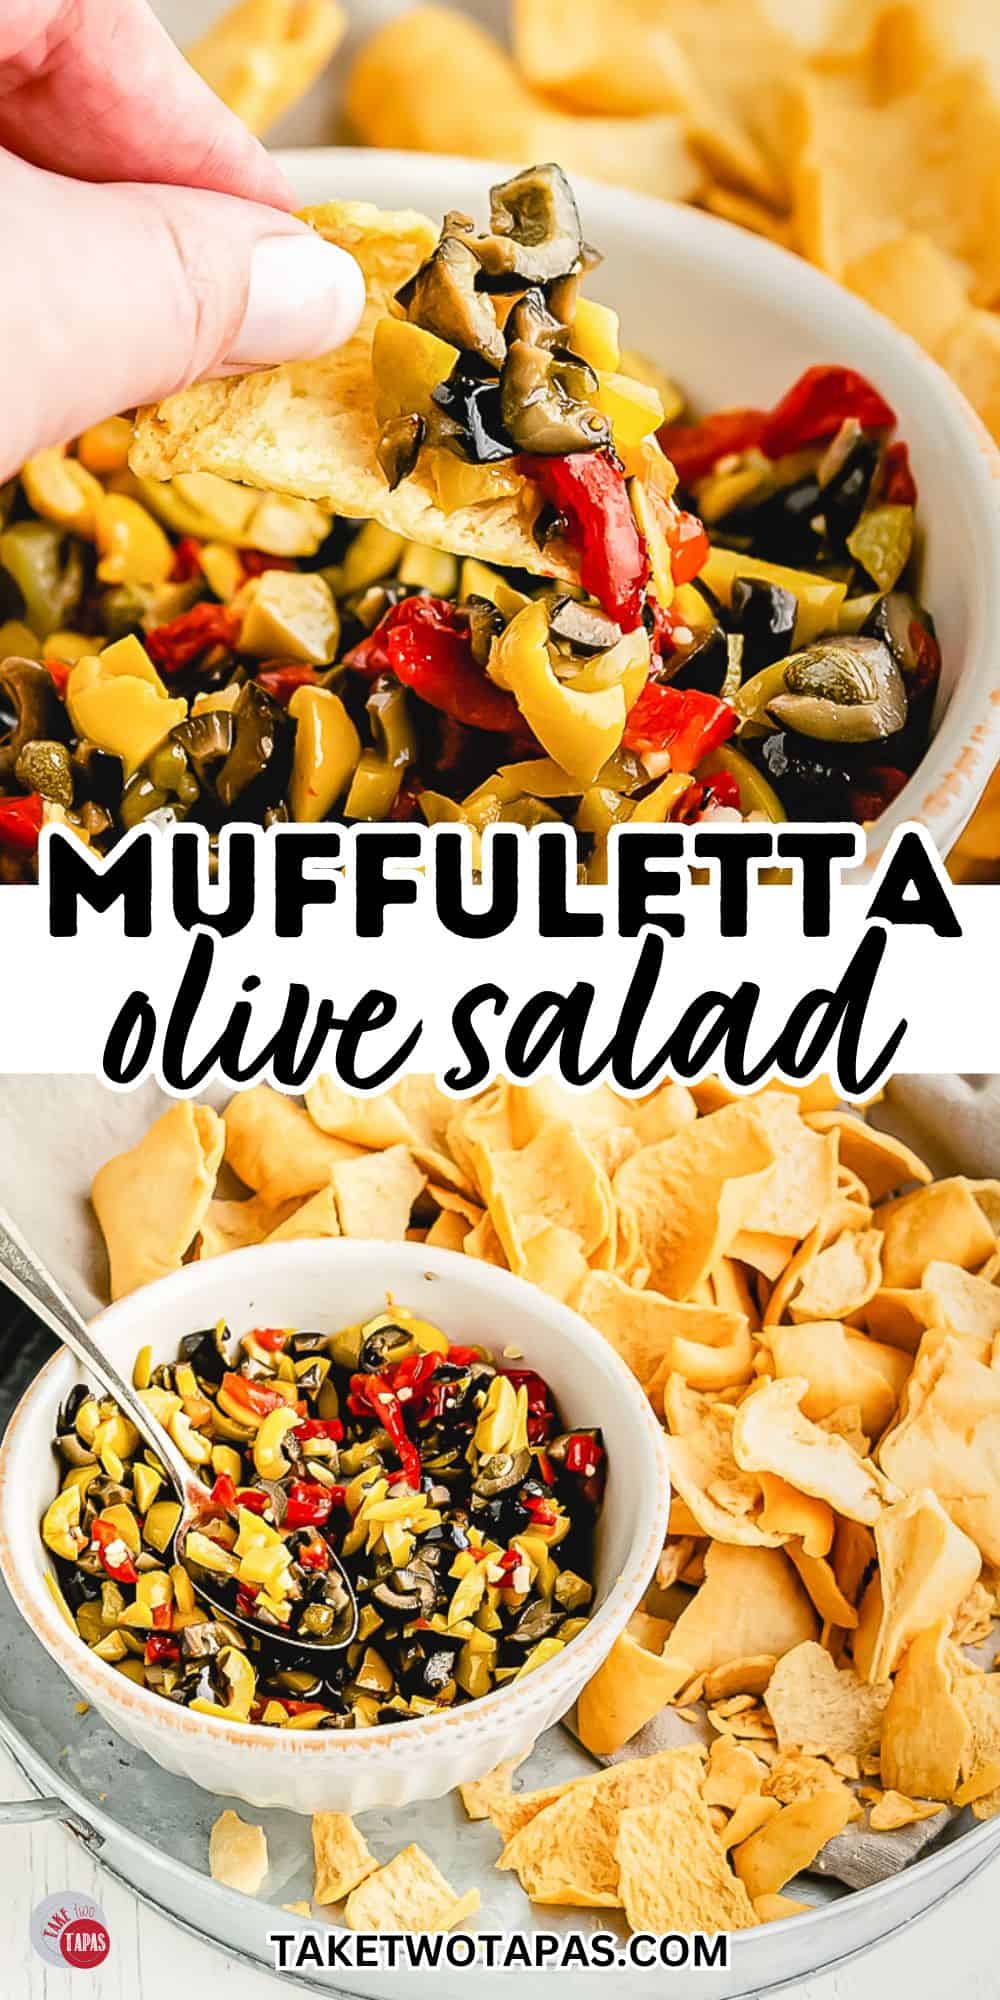 muffuletta olive salad from New Orleans